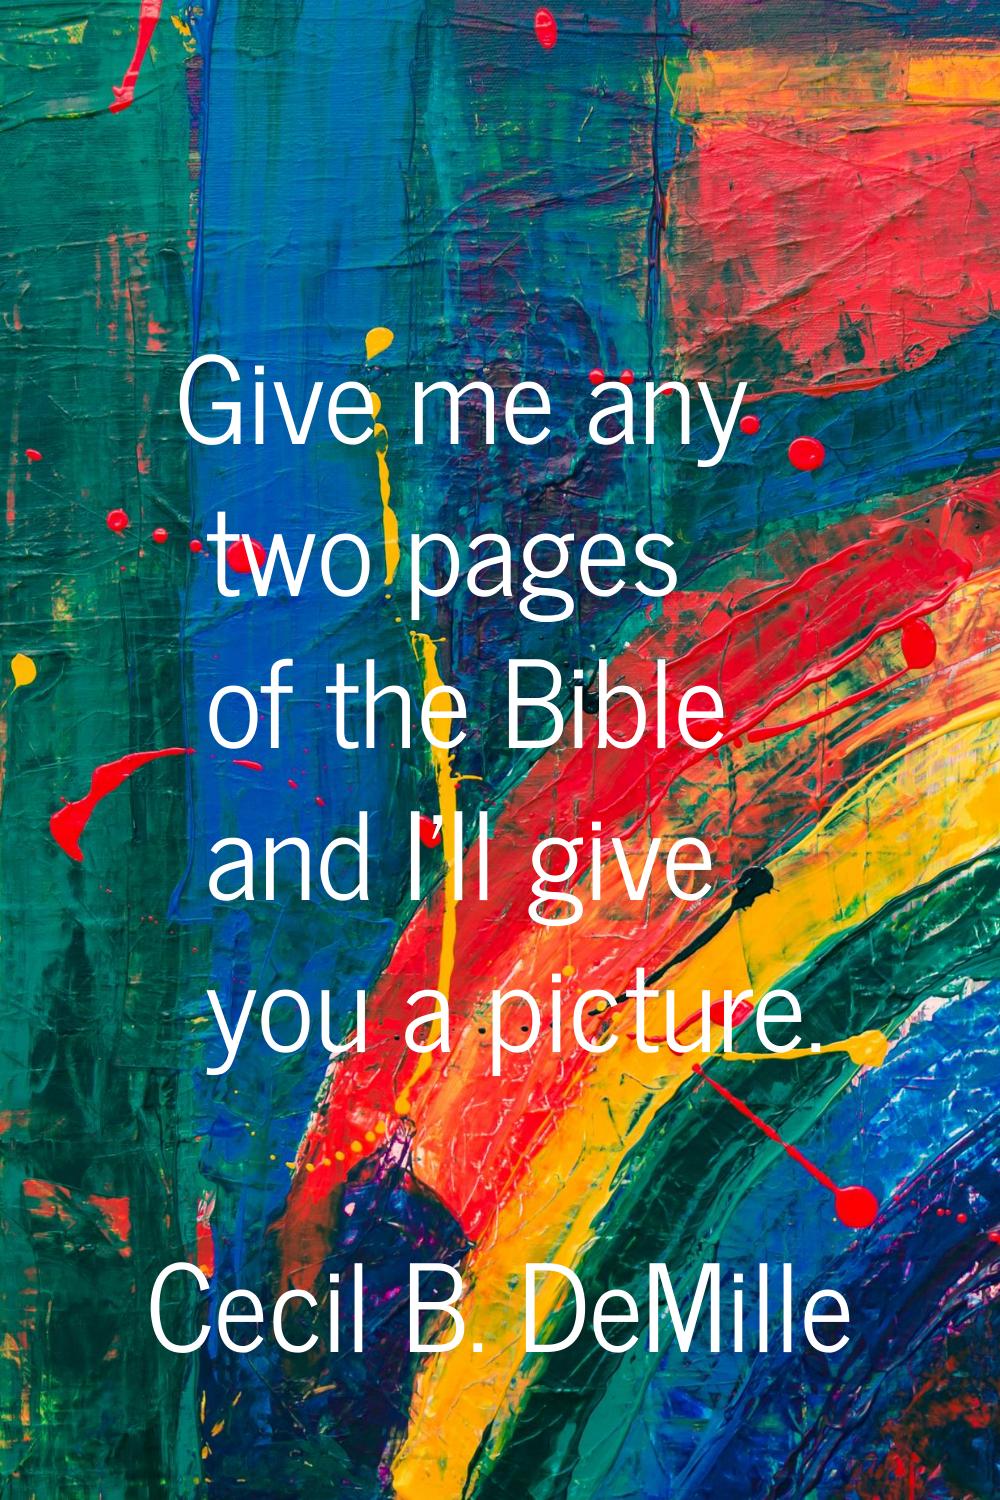 Give me any two pages of the Bible and I'll give you a picture.